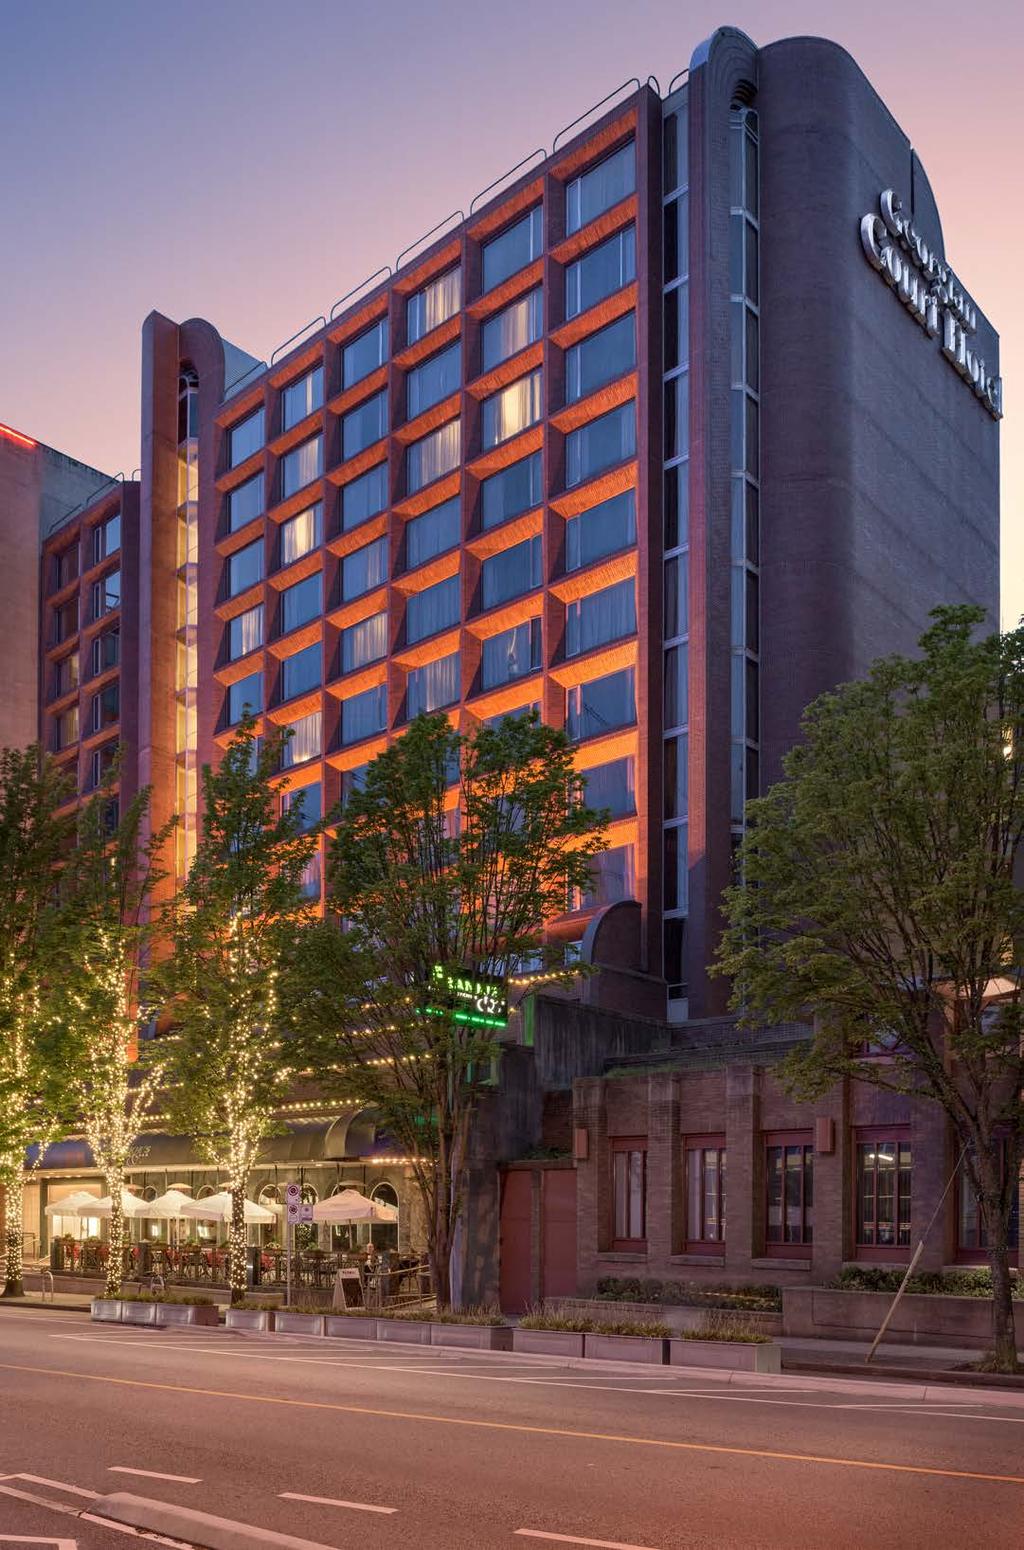 The Georgian Court Hotel is ideally situated in downtown Vancouver steps away from BC Place, Rogers Arena, Queen Elizabeth Theatre, Robson Street international shopping, Yaletown dining and historic